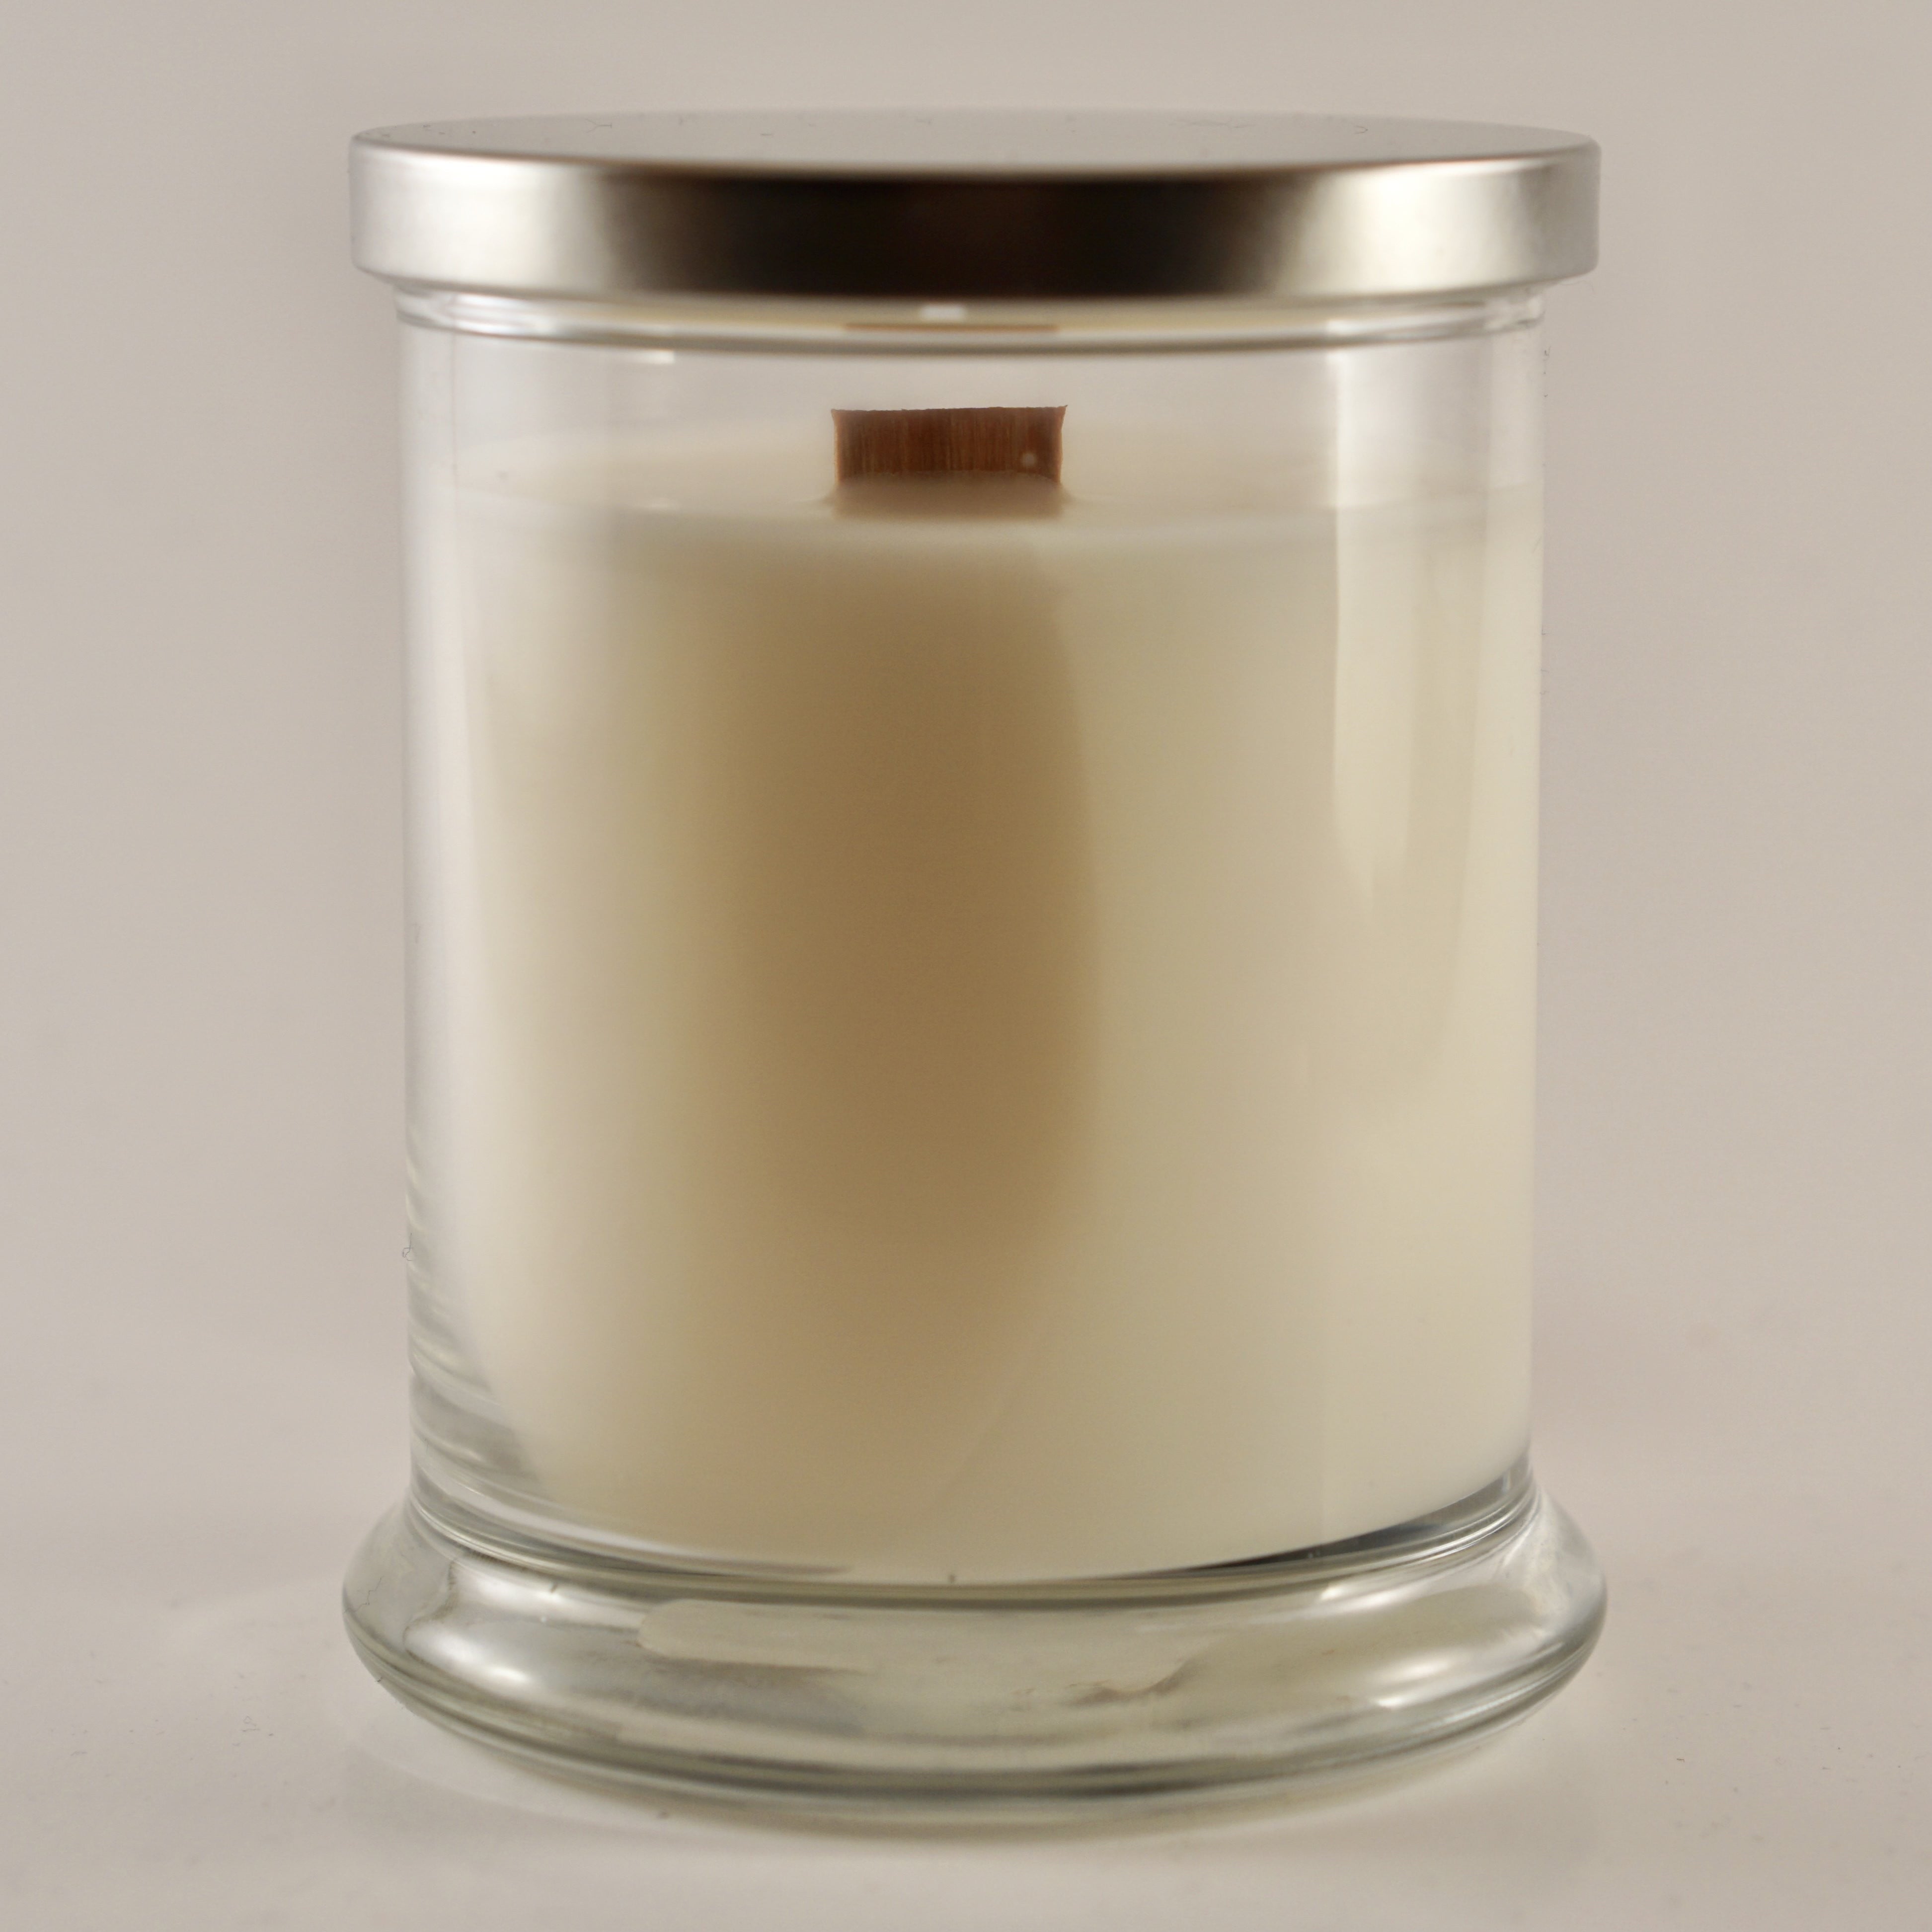 Misc. Scent Order - Monthly Candle Subscription